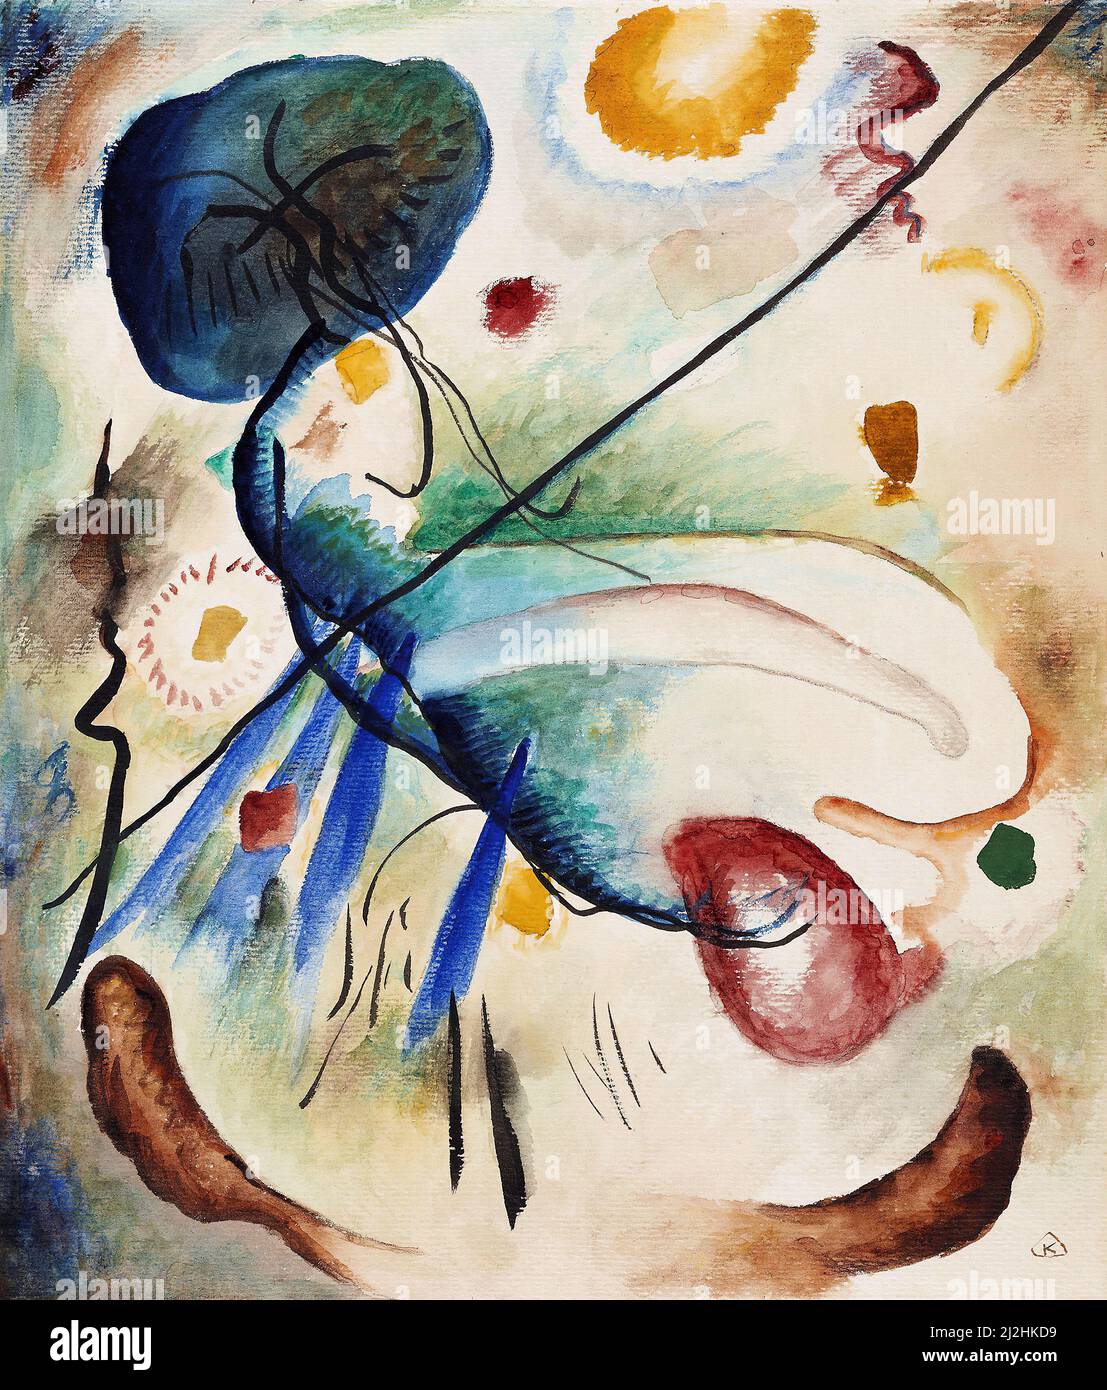 Painting by Wassily Kandinsky, 1910s. Aquarell mit Strich (1912) - Watercolor with line. Stock Photo